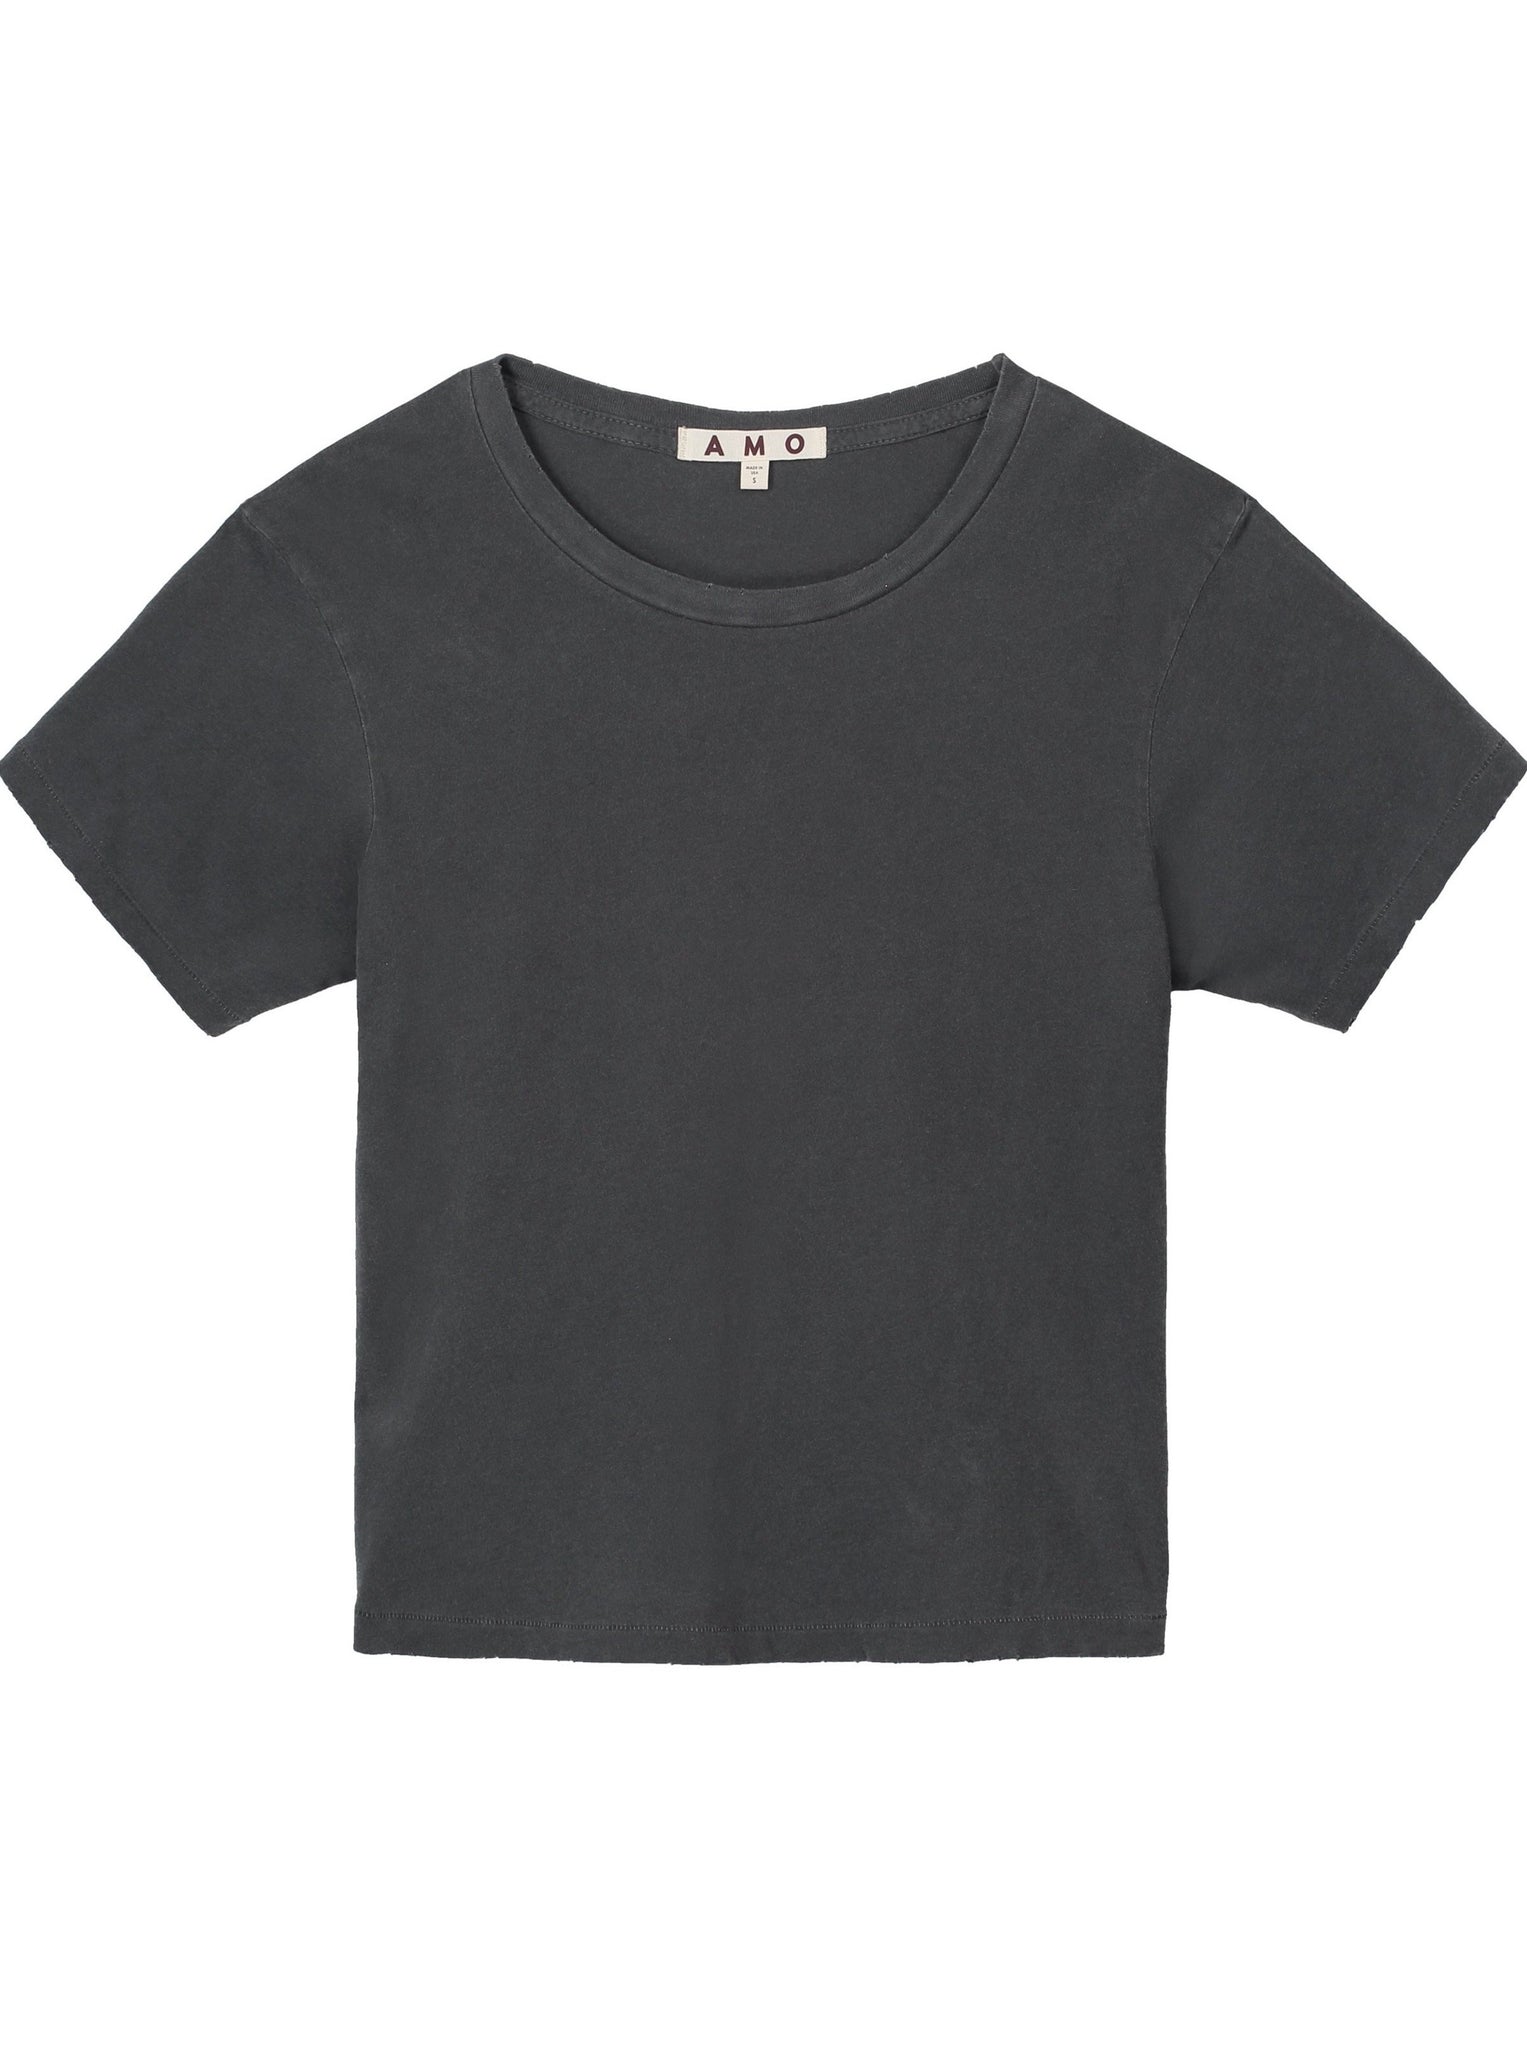 Classic women's tee with distressed edges. 